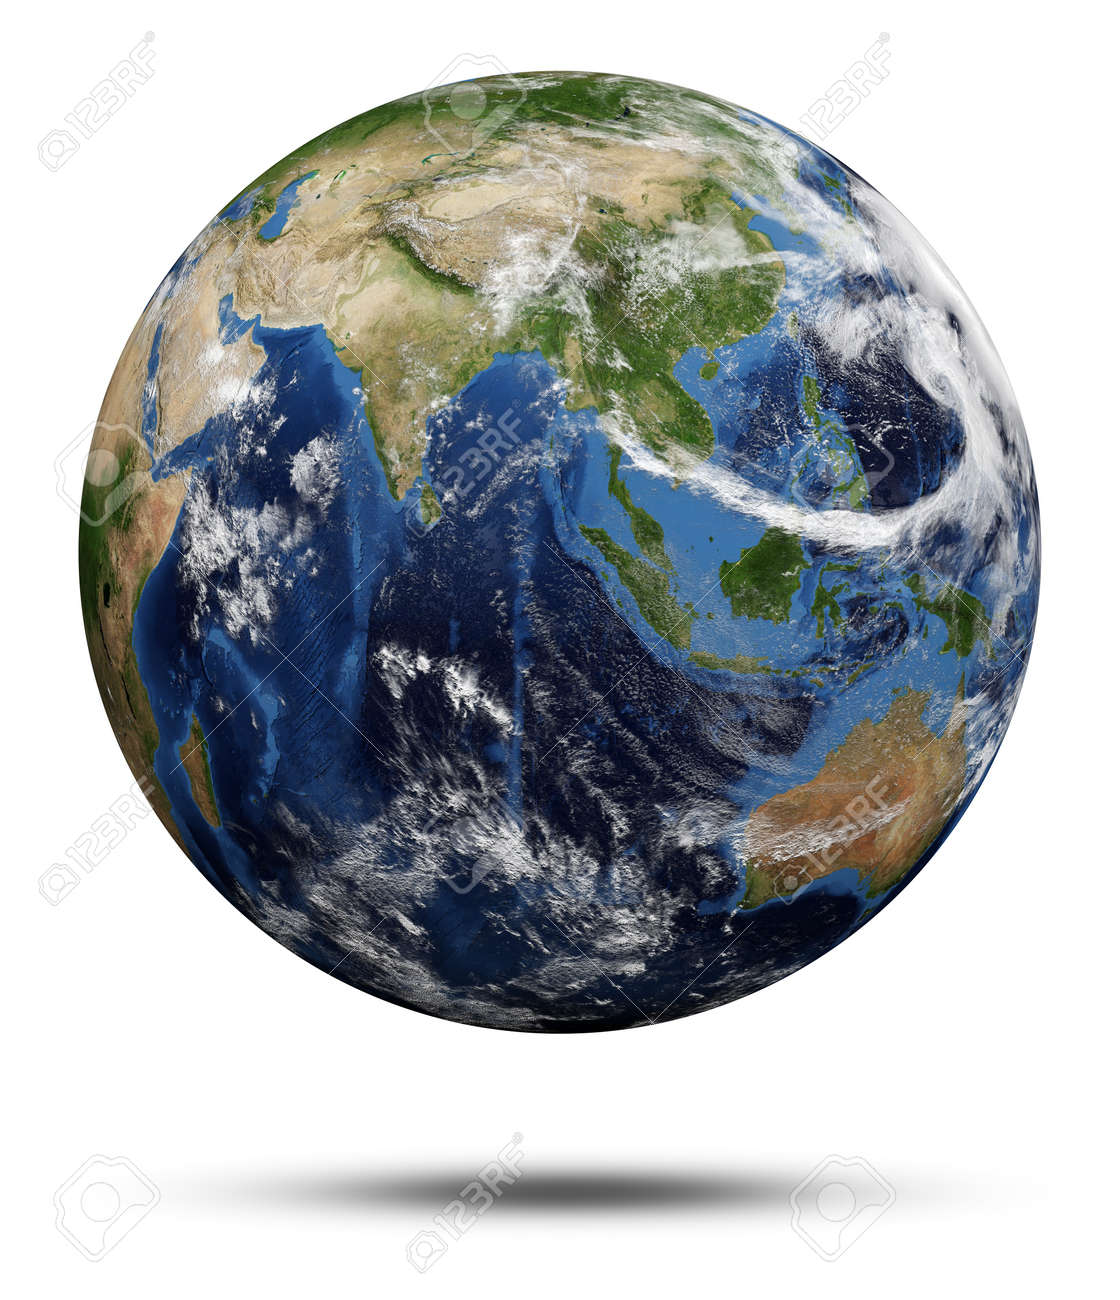 Royalty Free Earth Images